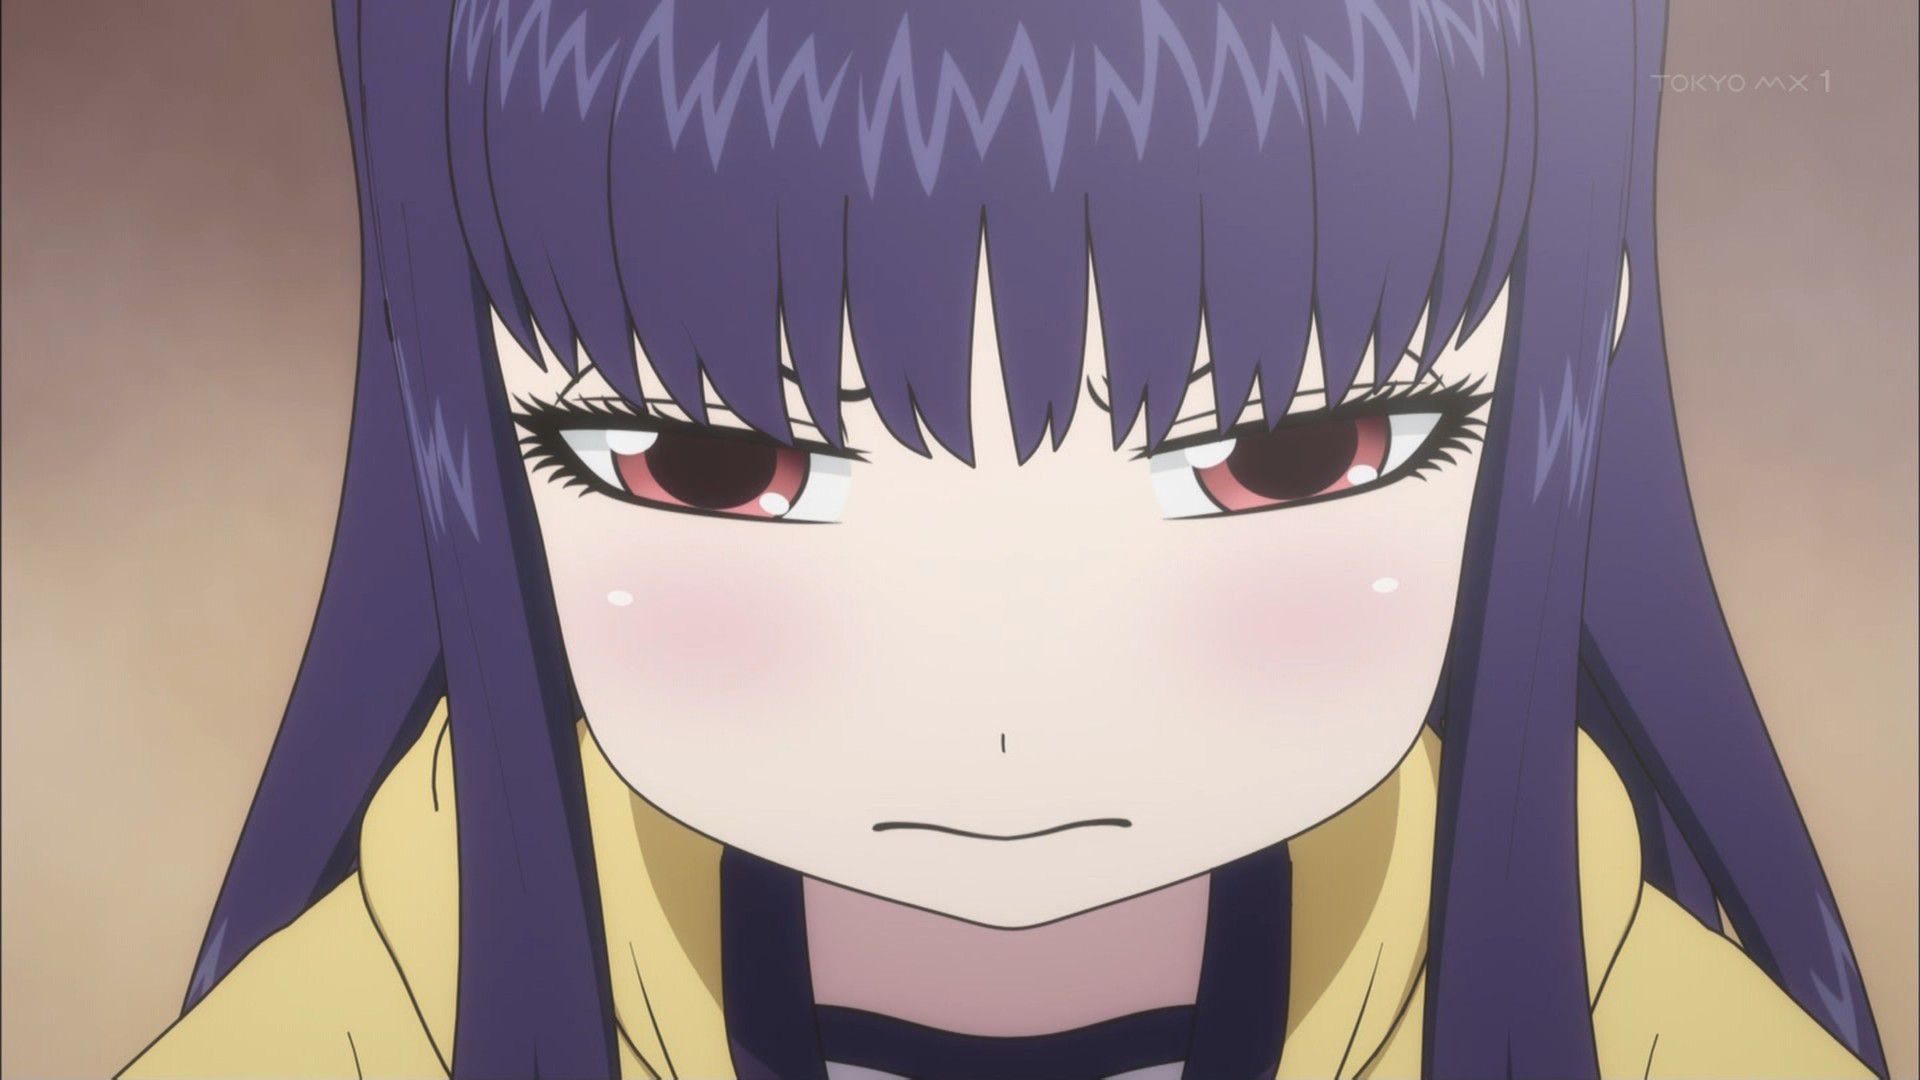 [God times] [high score girl] 8 story, grinning Shiman nee Oh yes Yes!!!! 8